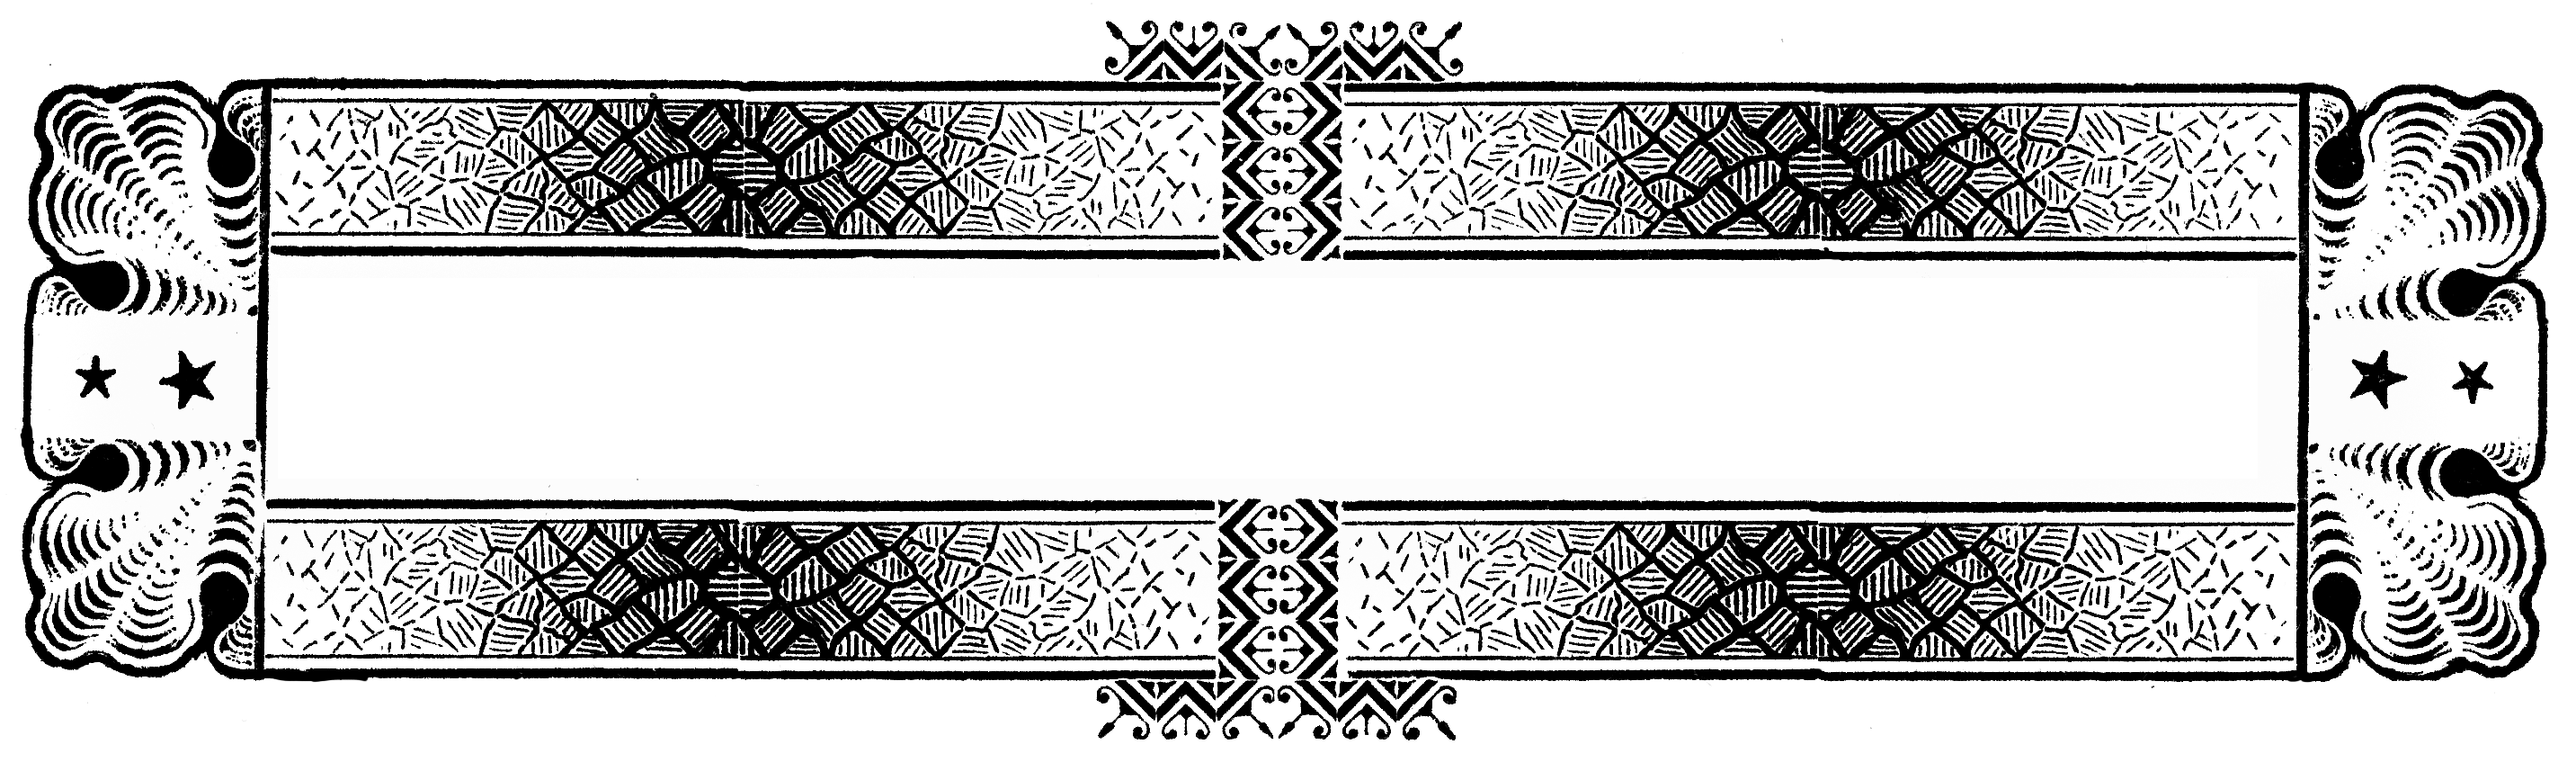 Divider With Star Pattern